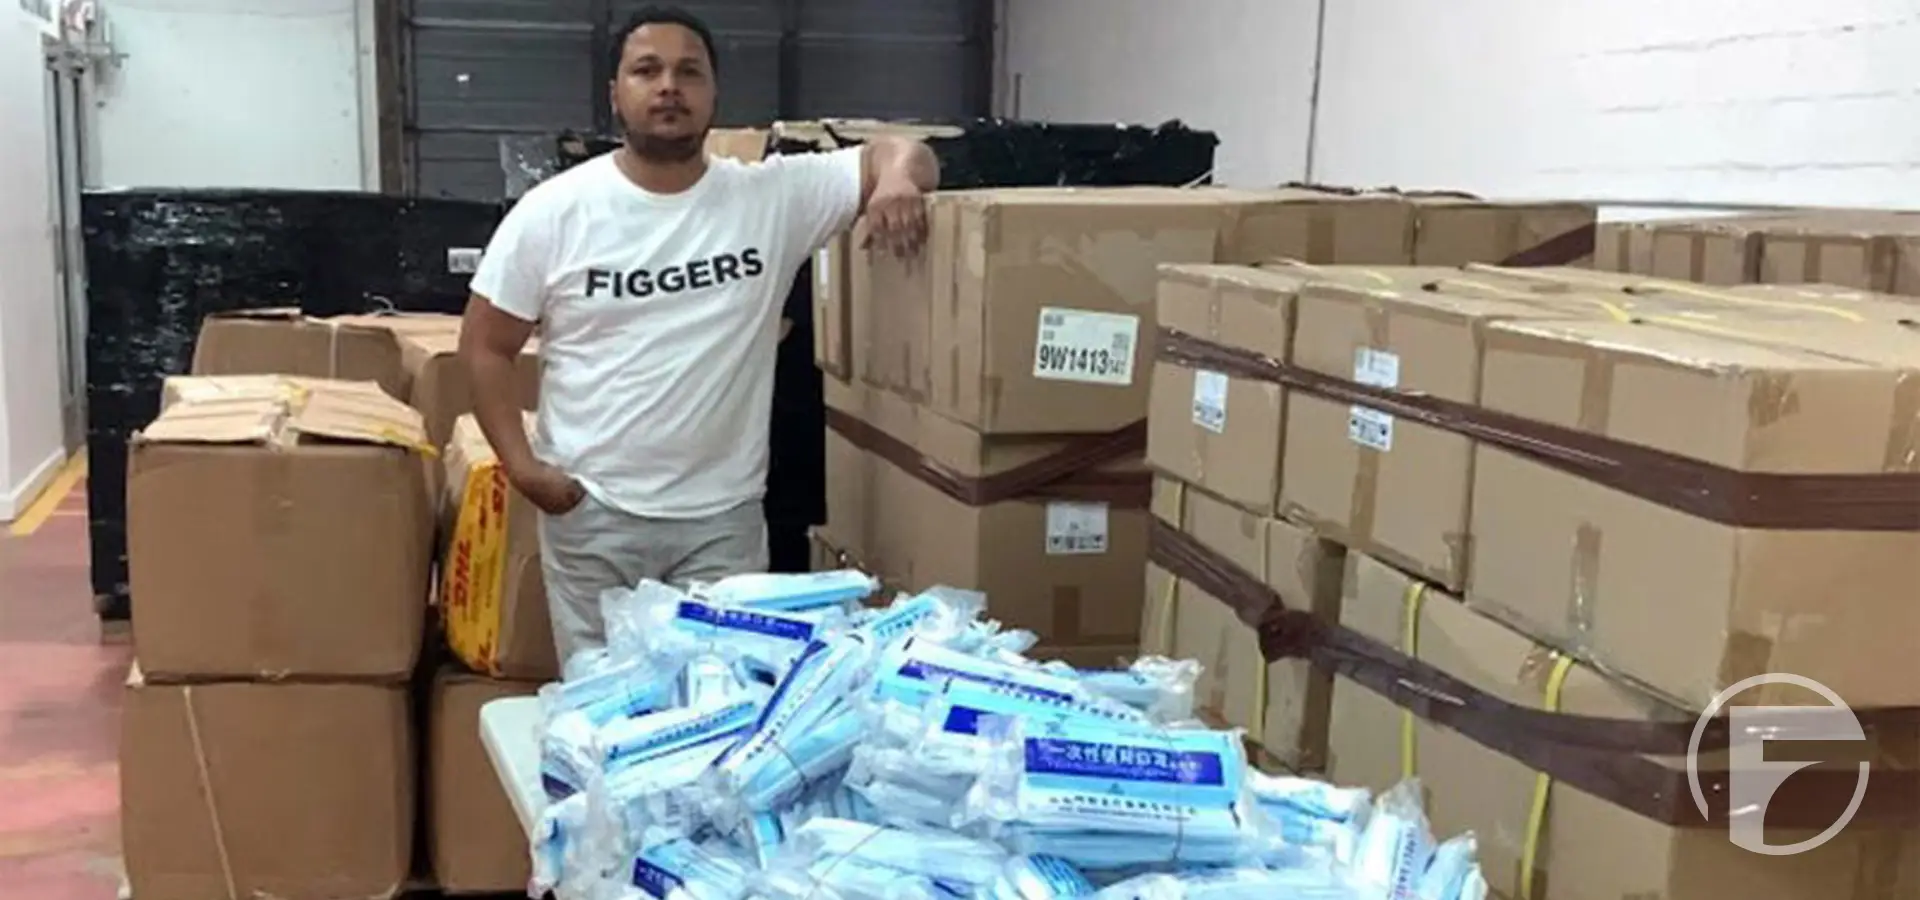 Black-owned tech company Figgers Wireless donates 700,000 PPE kits to frontline workers in coronavirus outbreak hotspots throughout the country